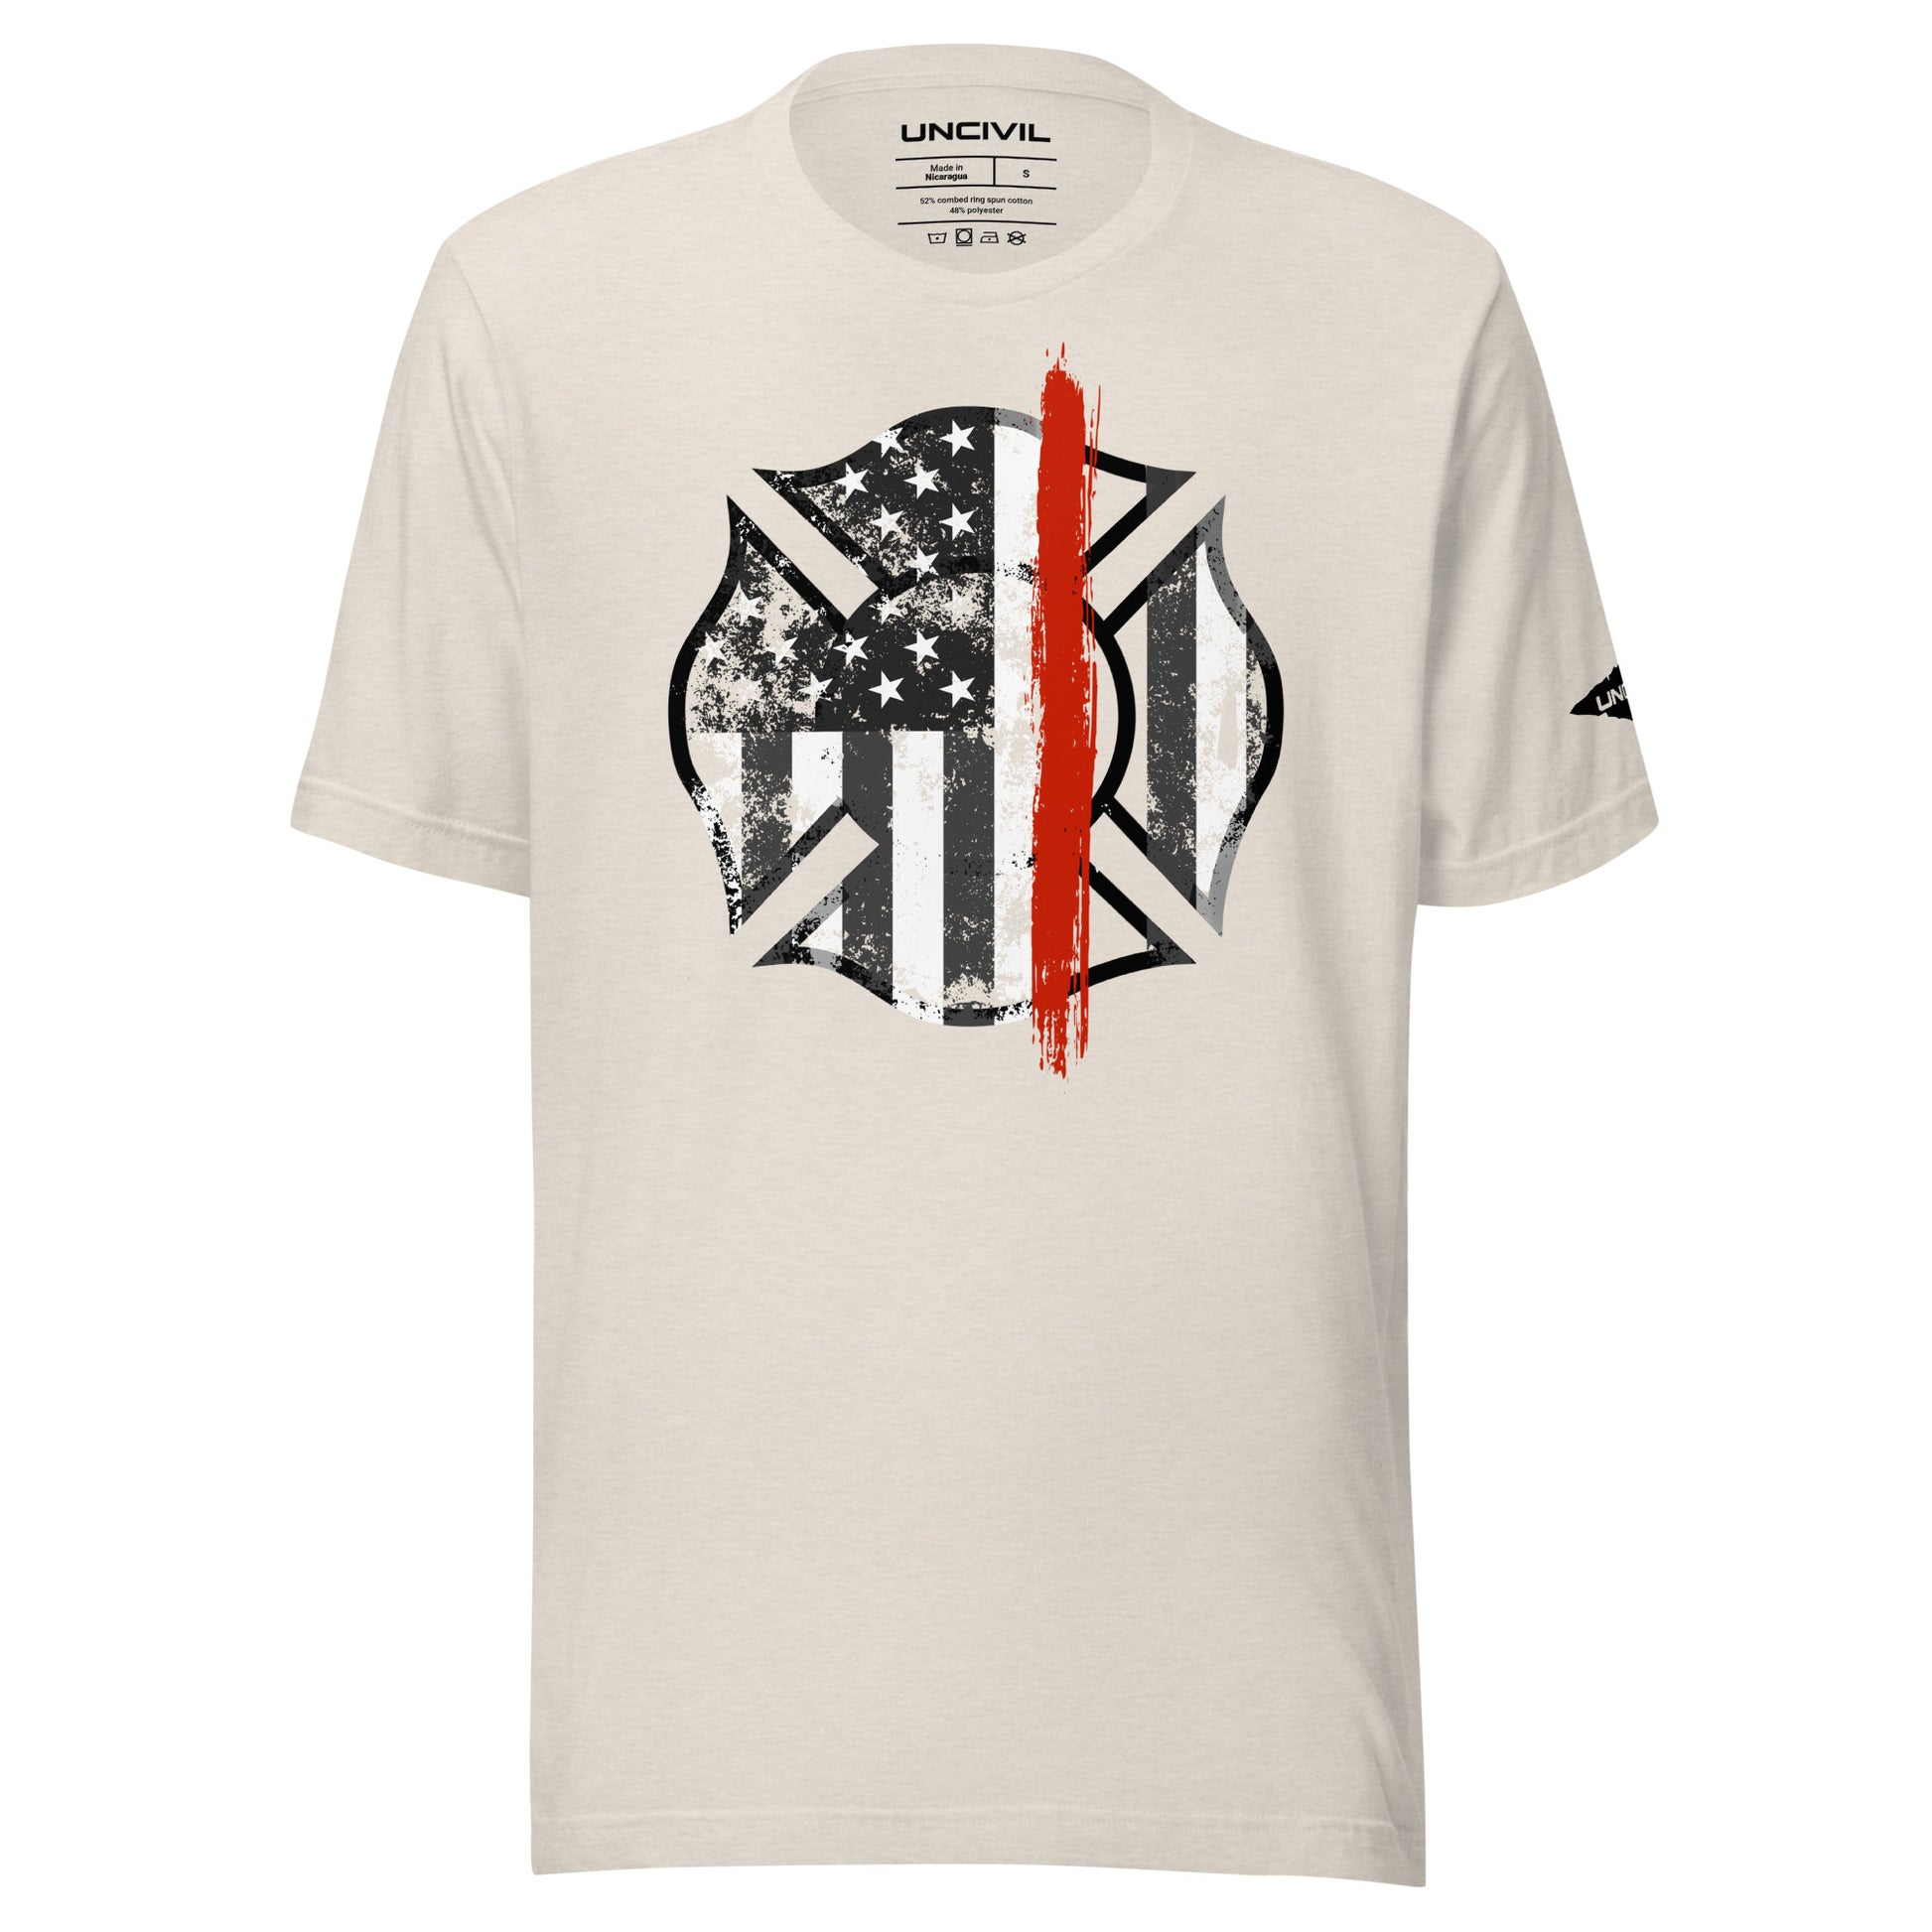 Back the Red t-shirt. Firefighter Thin Red Line shirt in heather dust.